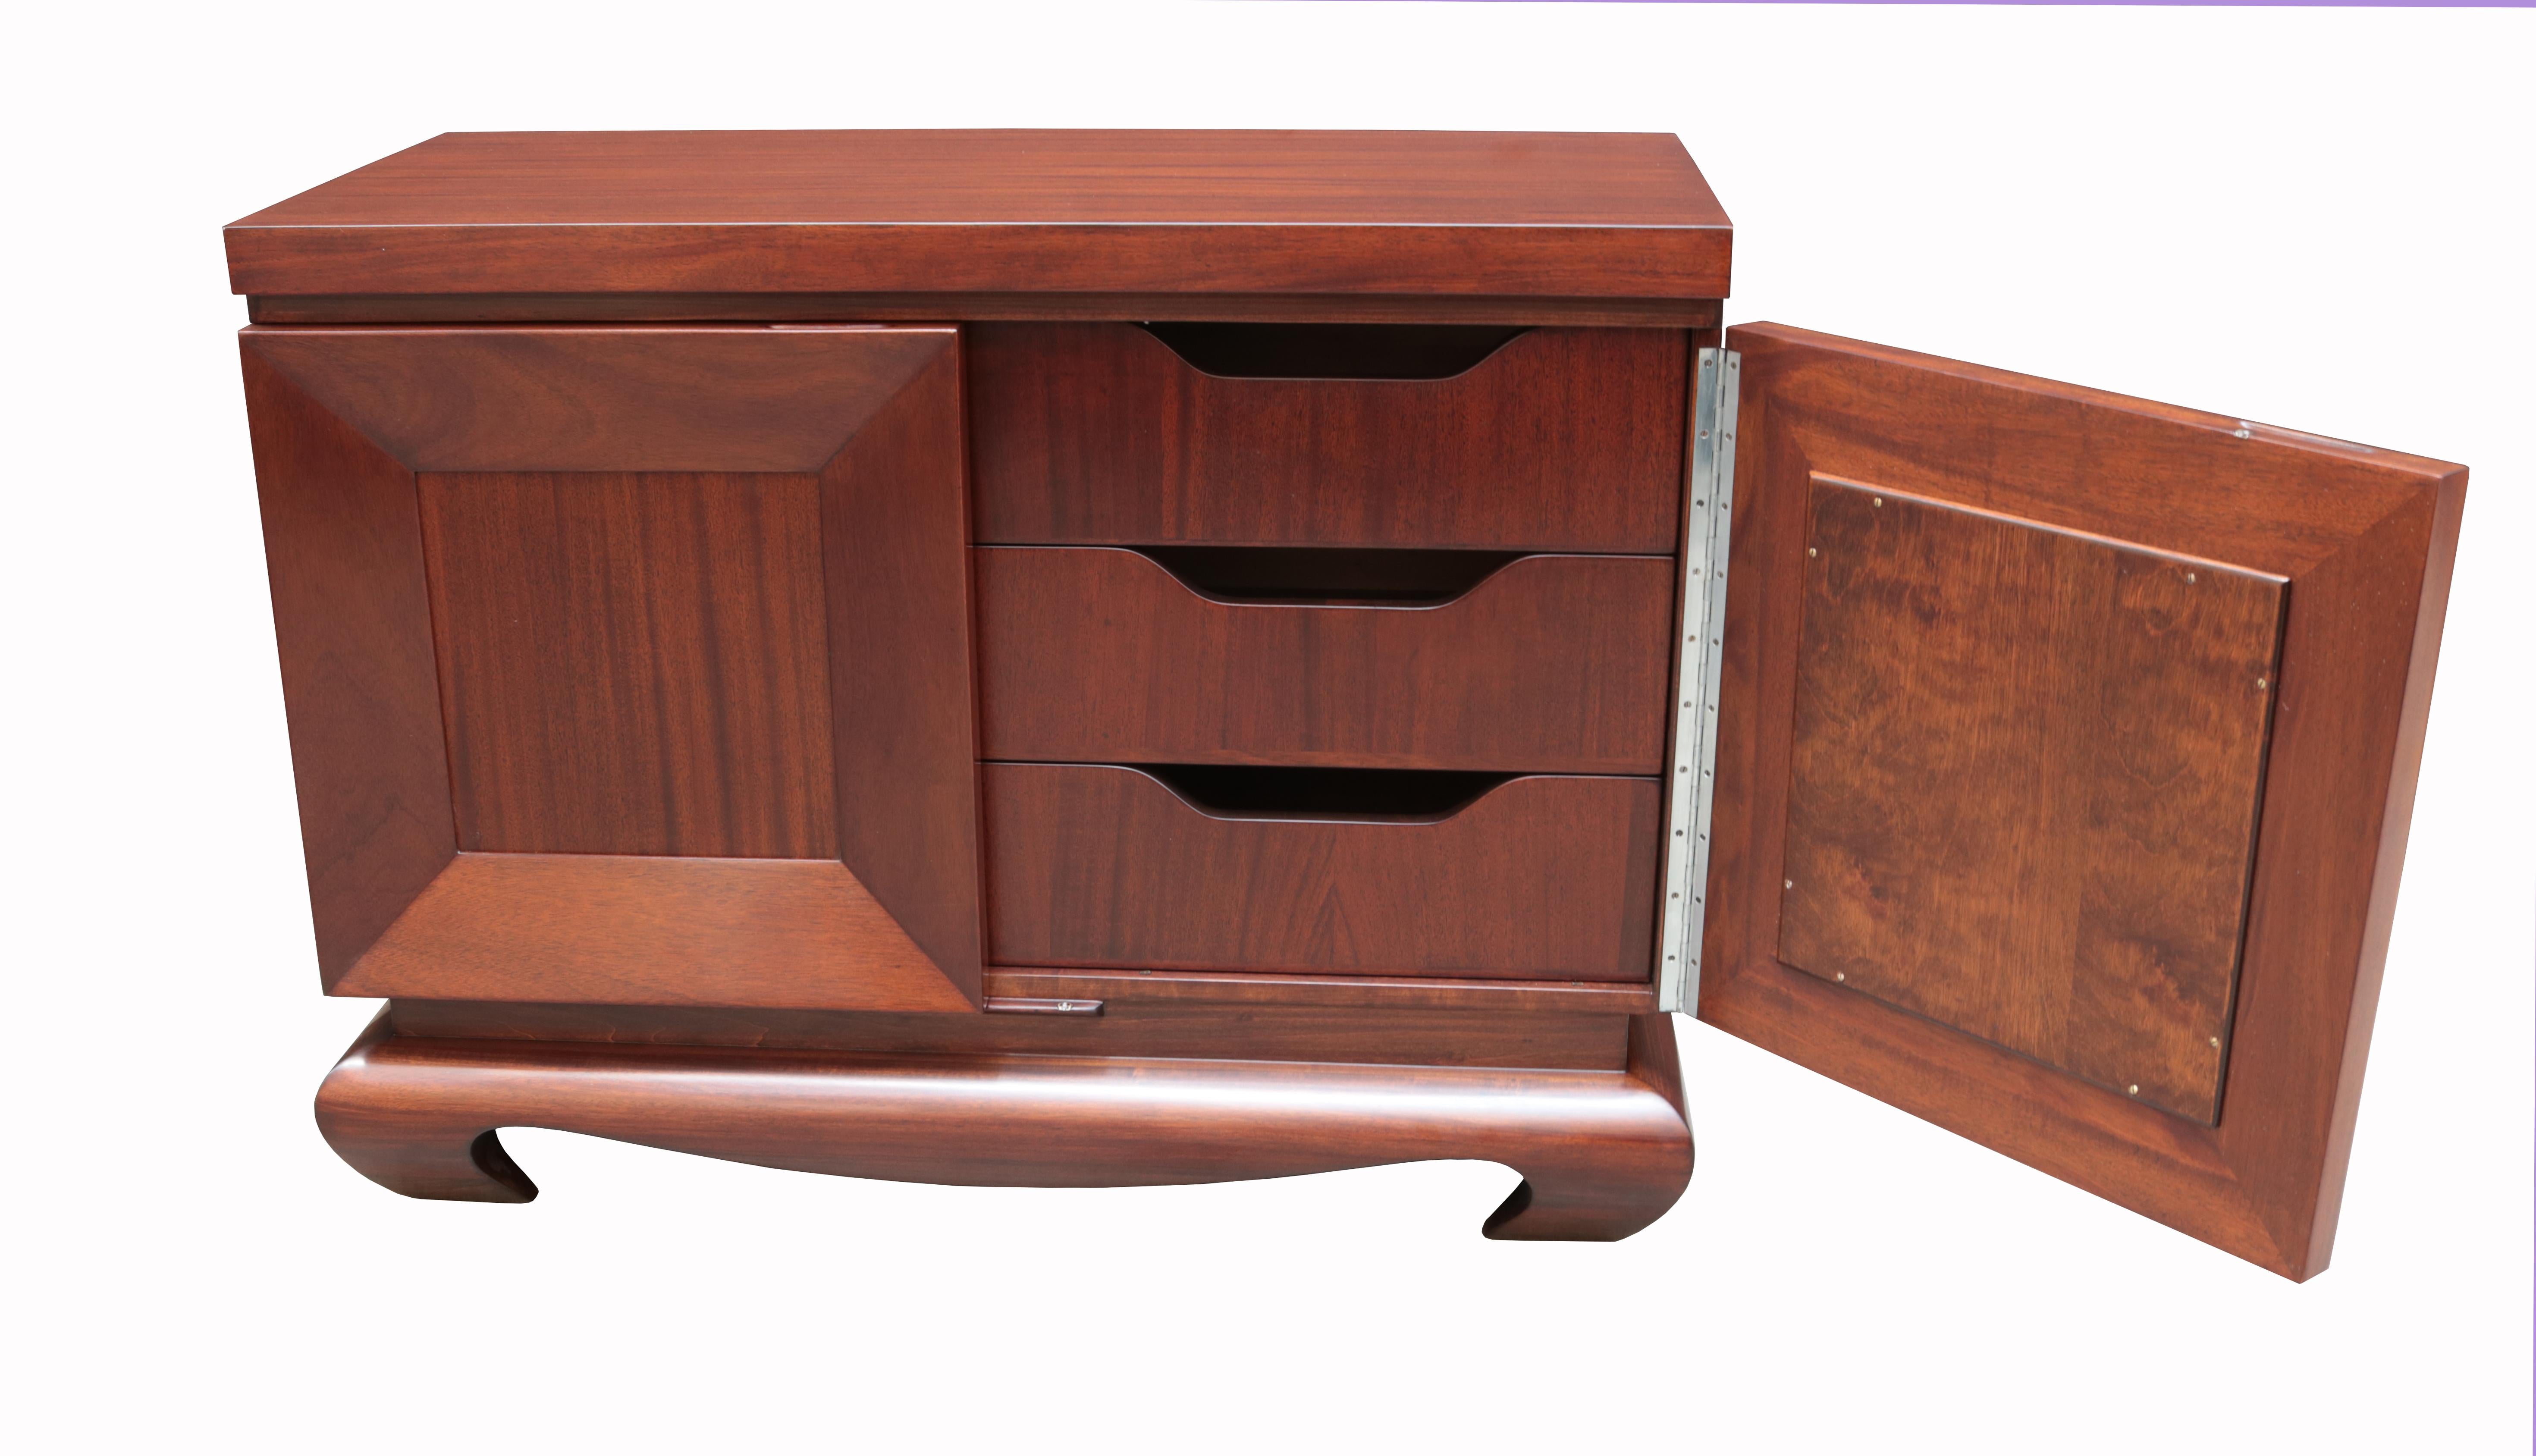 A Modernist two-door cabinet.
Doors with recessed front panels
and three interior drawers,
Asian-inspired sculptural base,
featuring branded signature 